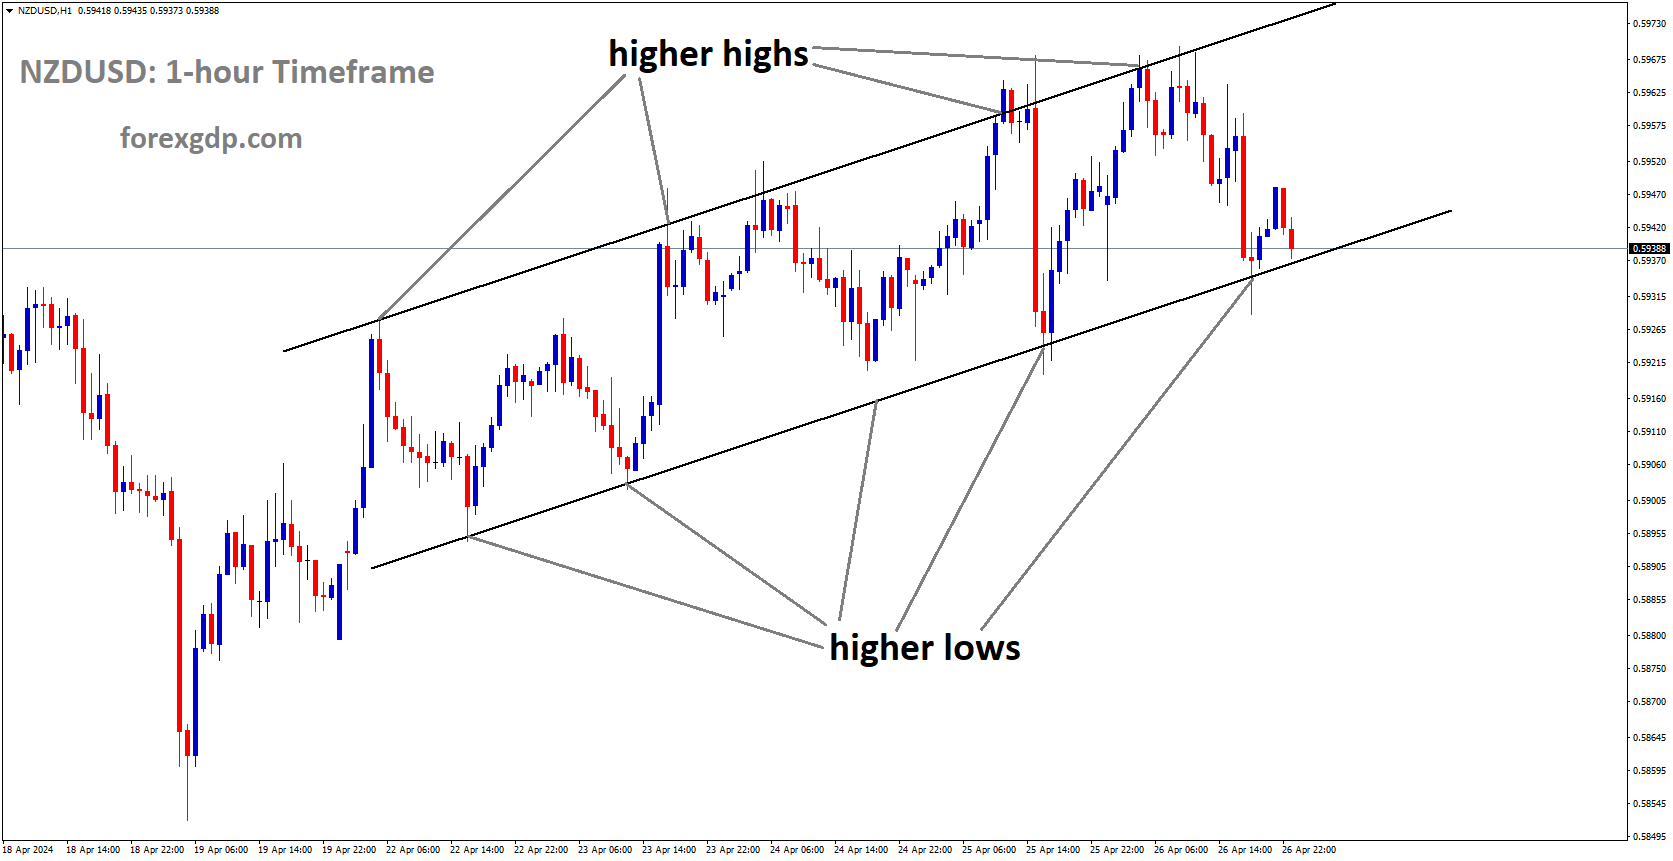 NZDUSD is moving in Ascending channel and market has reached higher low area of the channel